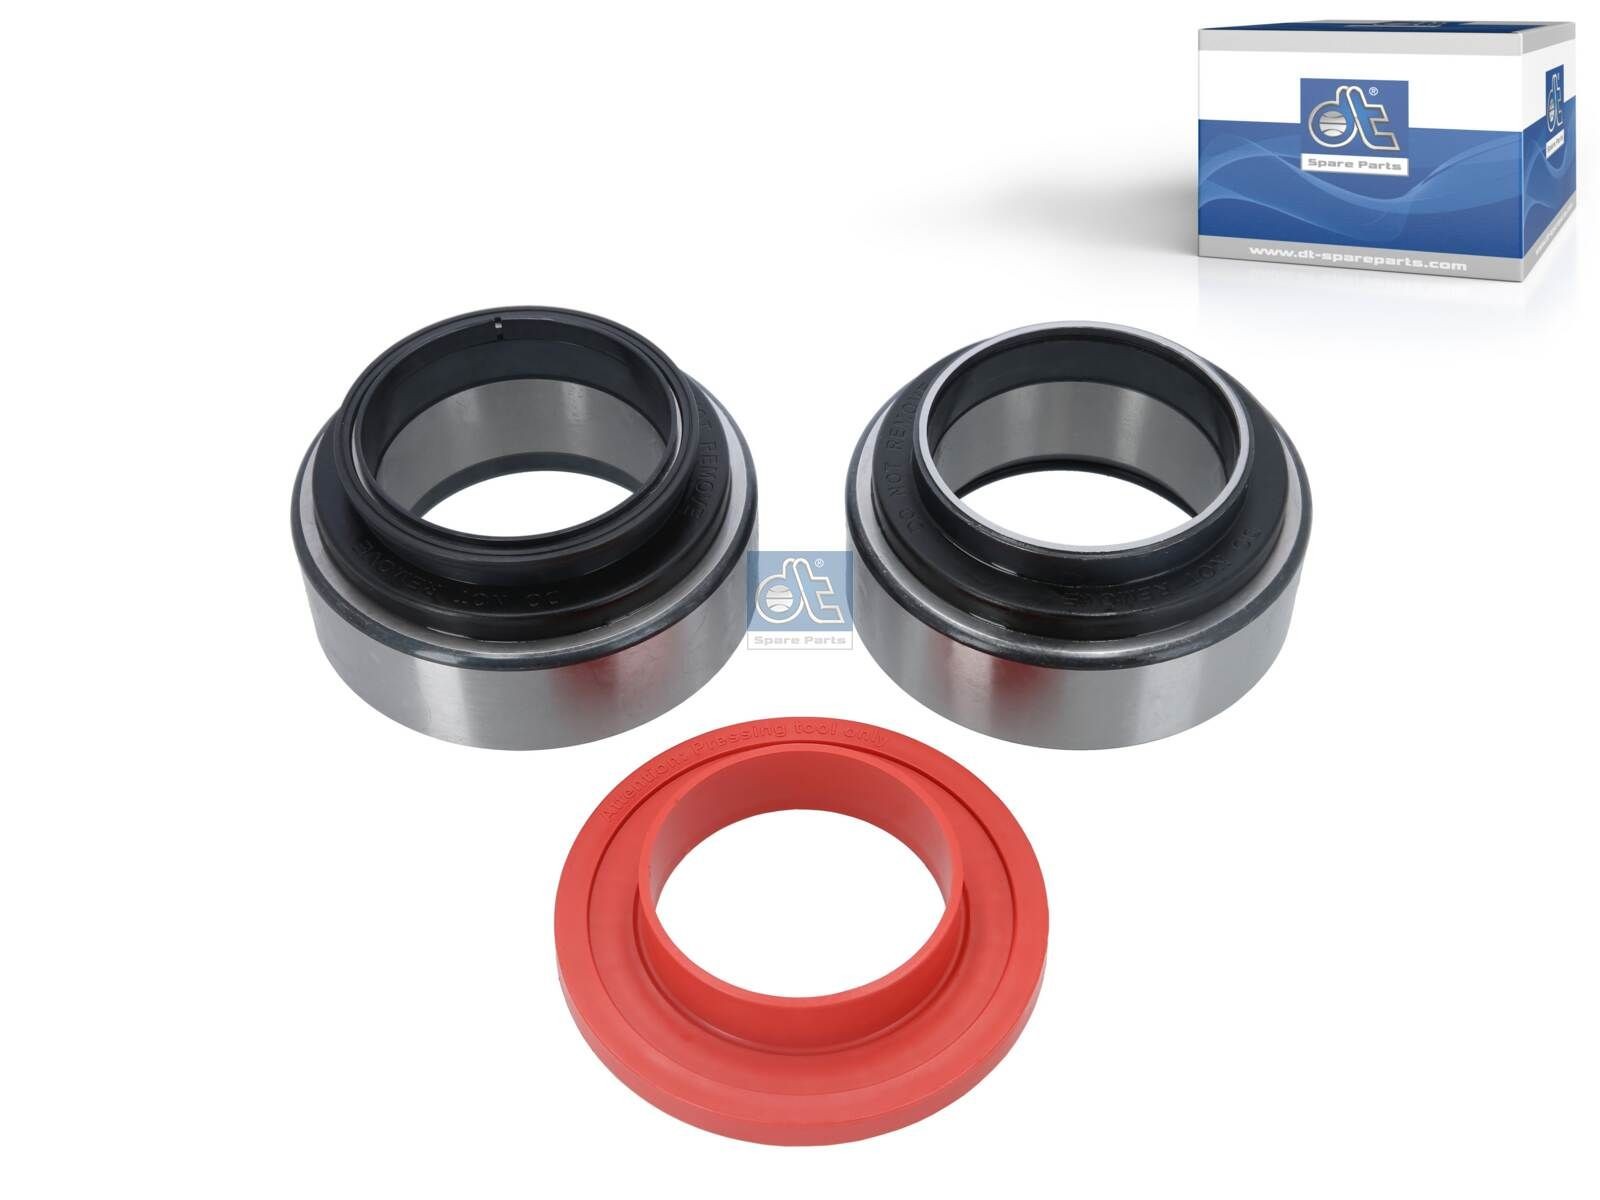 566425.H195 DT Spare Parts 2.96207 Wheel bearing kit 2079244-0